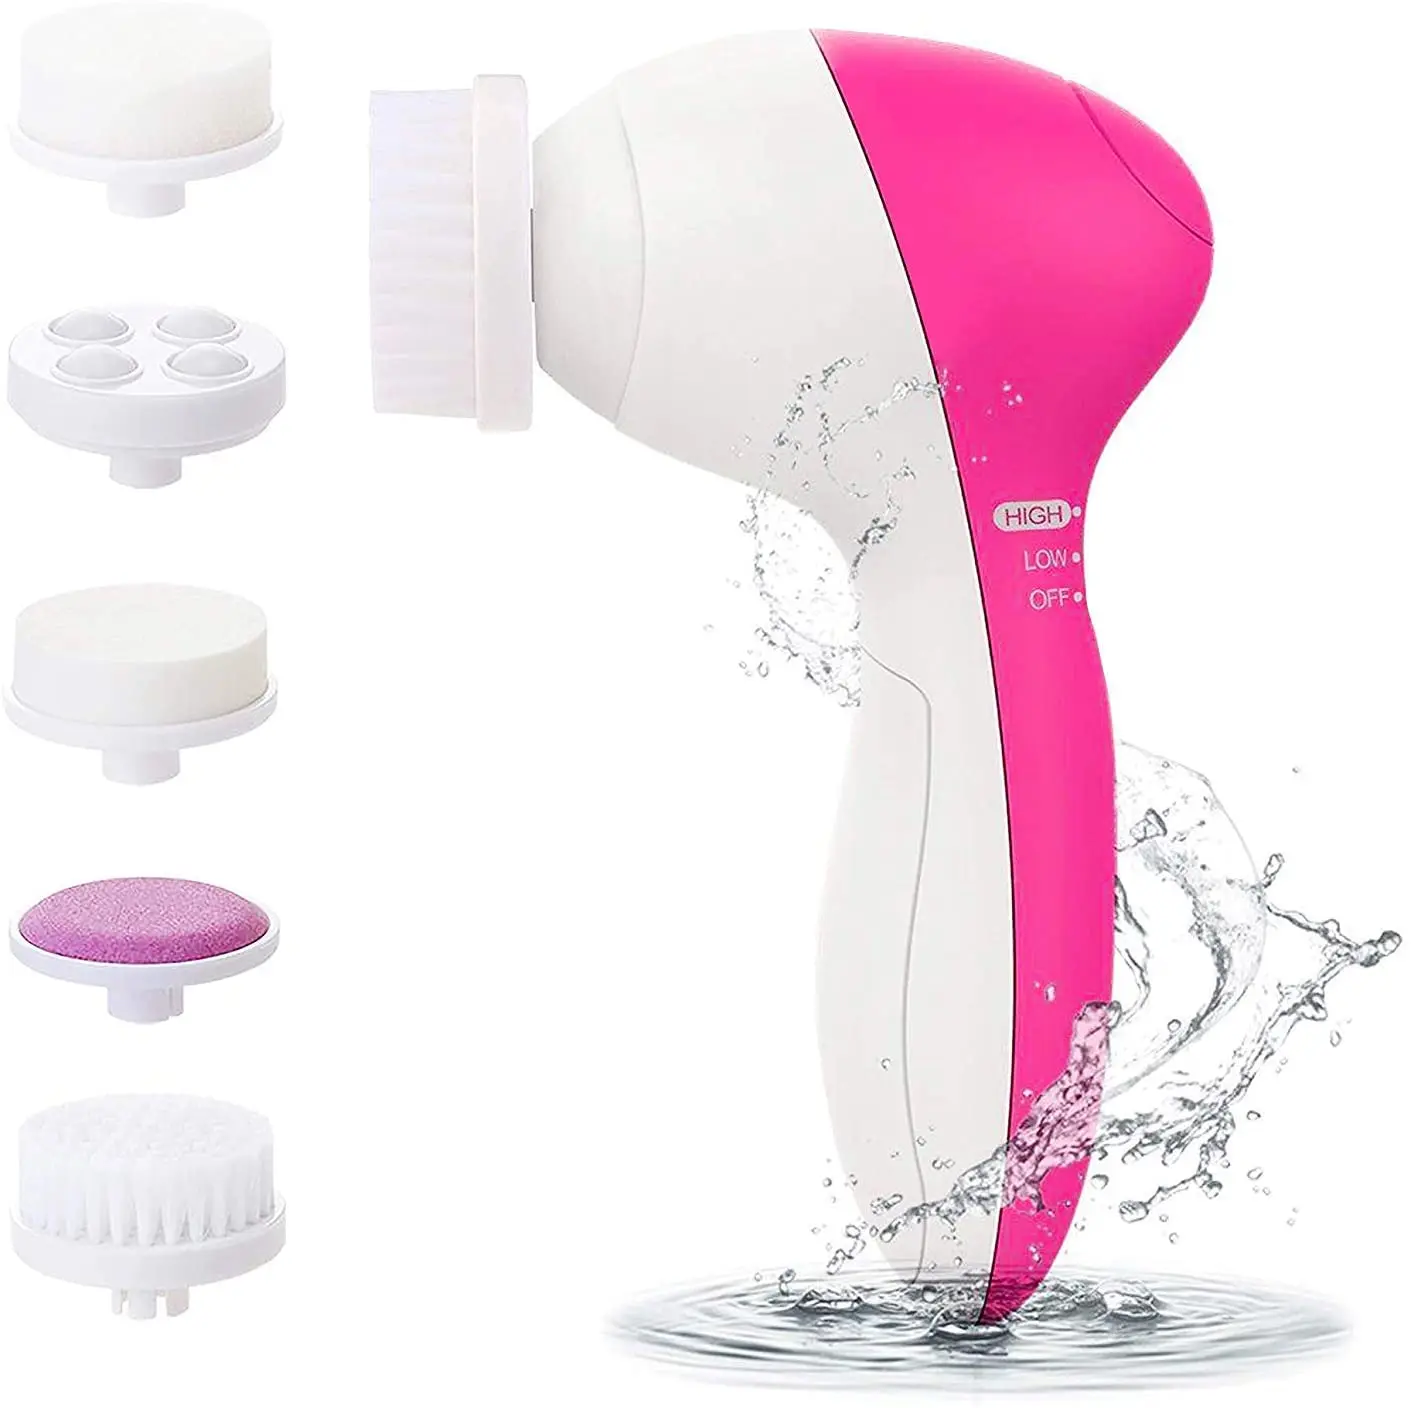 

Electric Facial Cleansing Brush Waterproof Face Spin Brush with 5 Brush Heads for Deep Cleansing Gentle Exfoliating